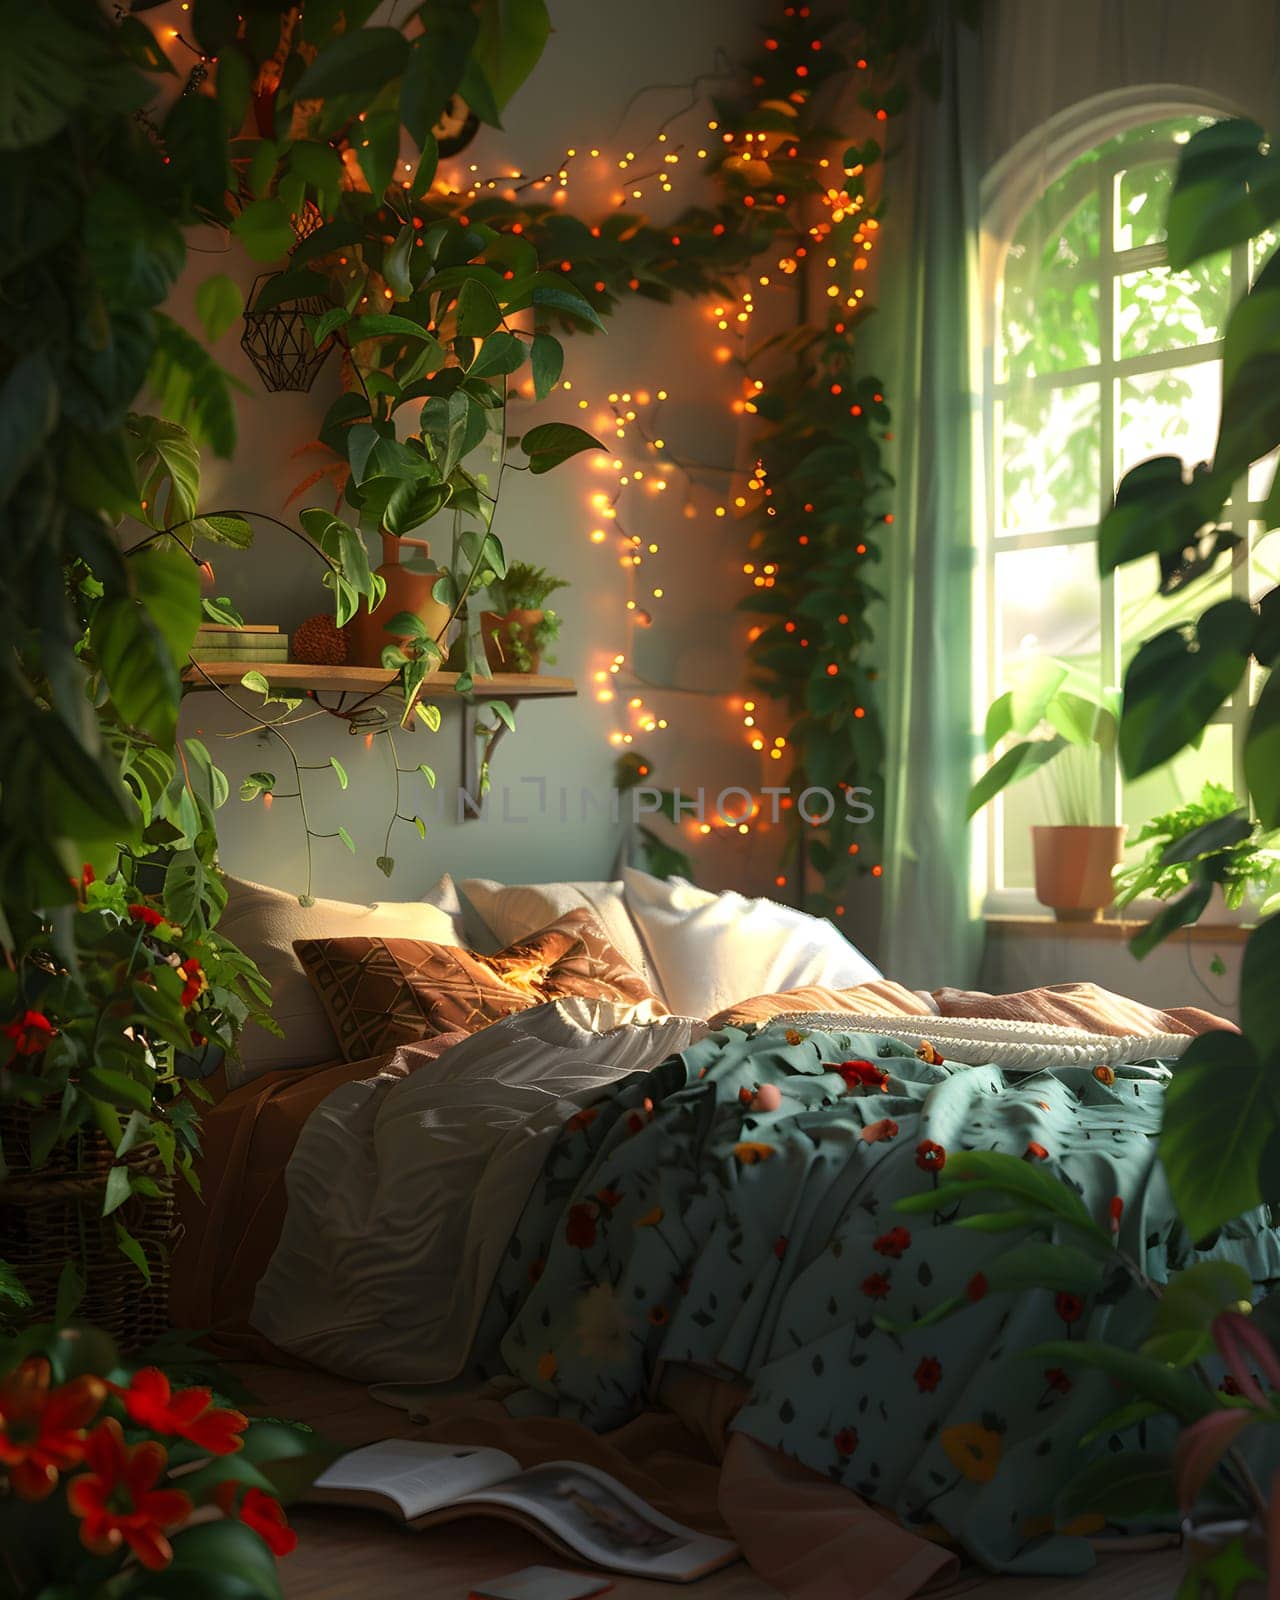 A bedroom with a cozy bed framed by lush houseplants, casting a warm glow with fairy lights. The natural landscape outside the window adds to the serene atmosphere